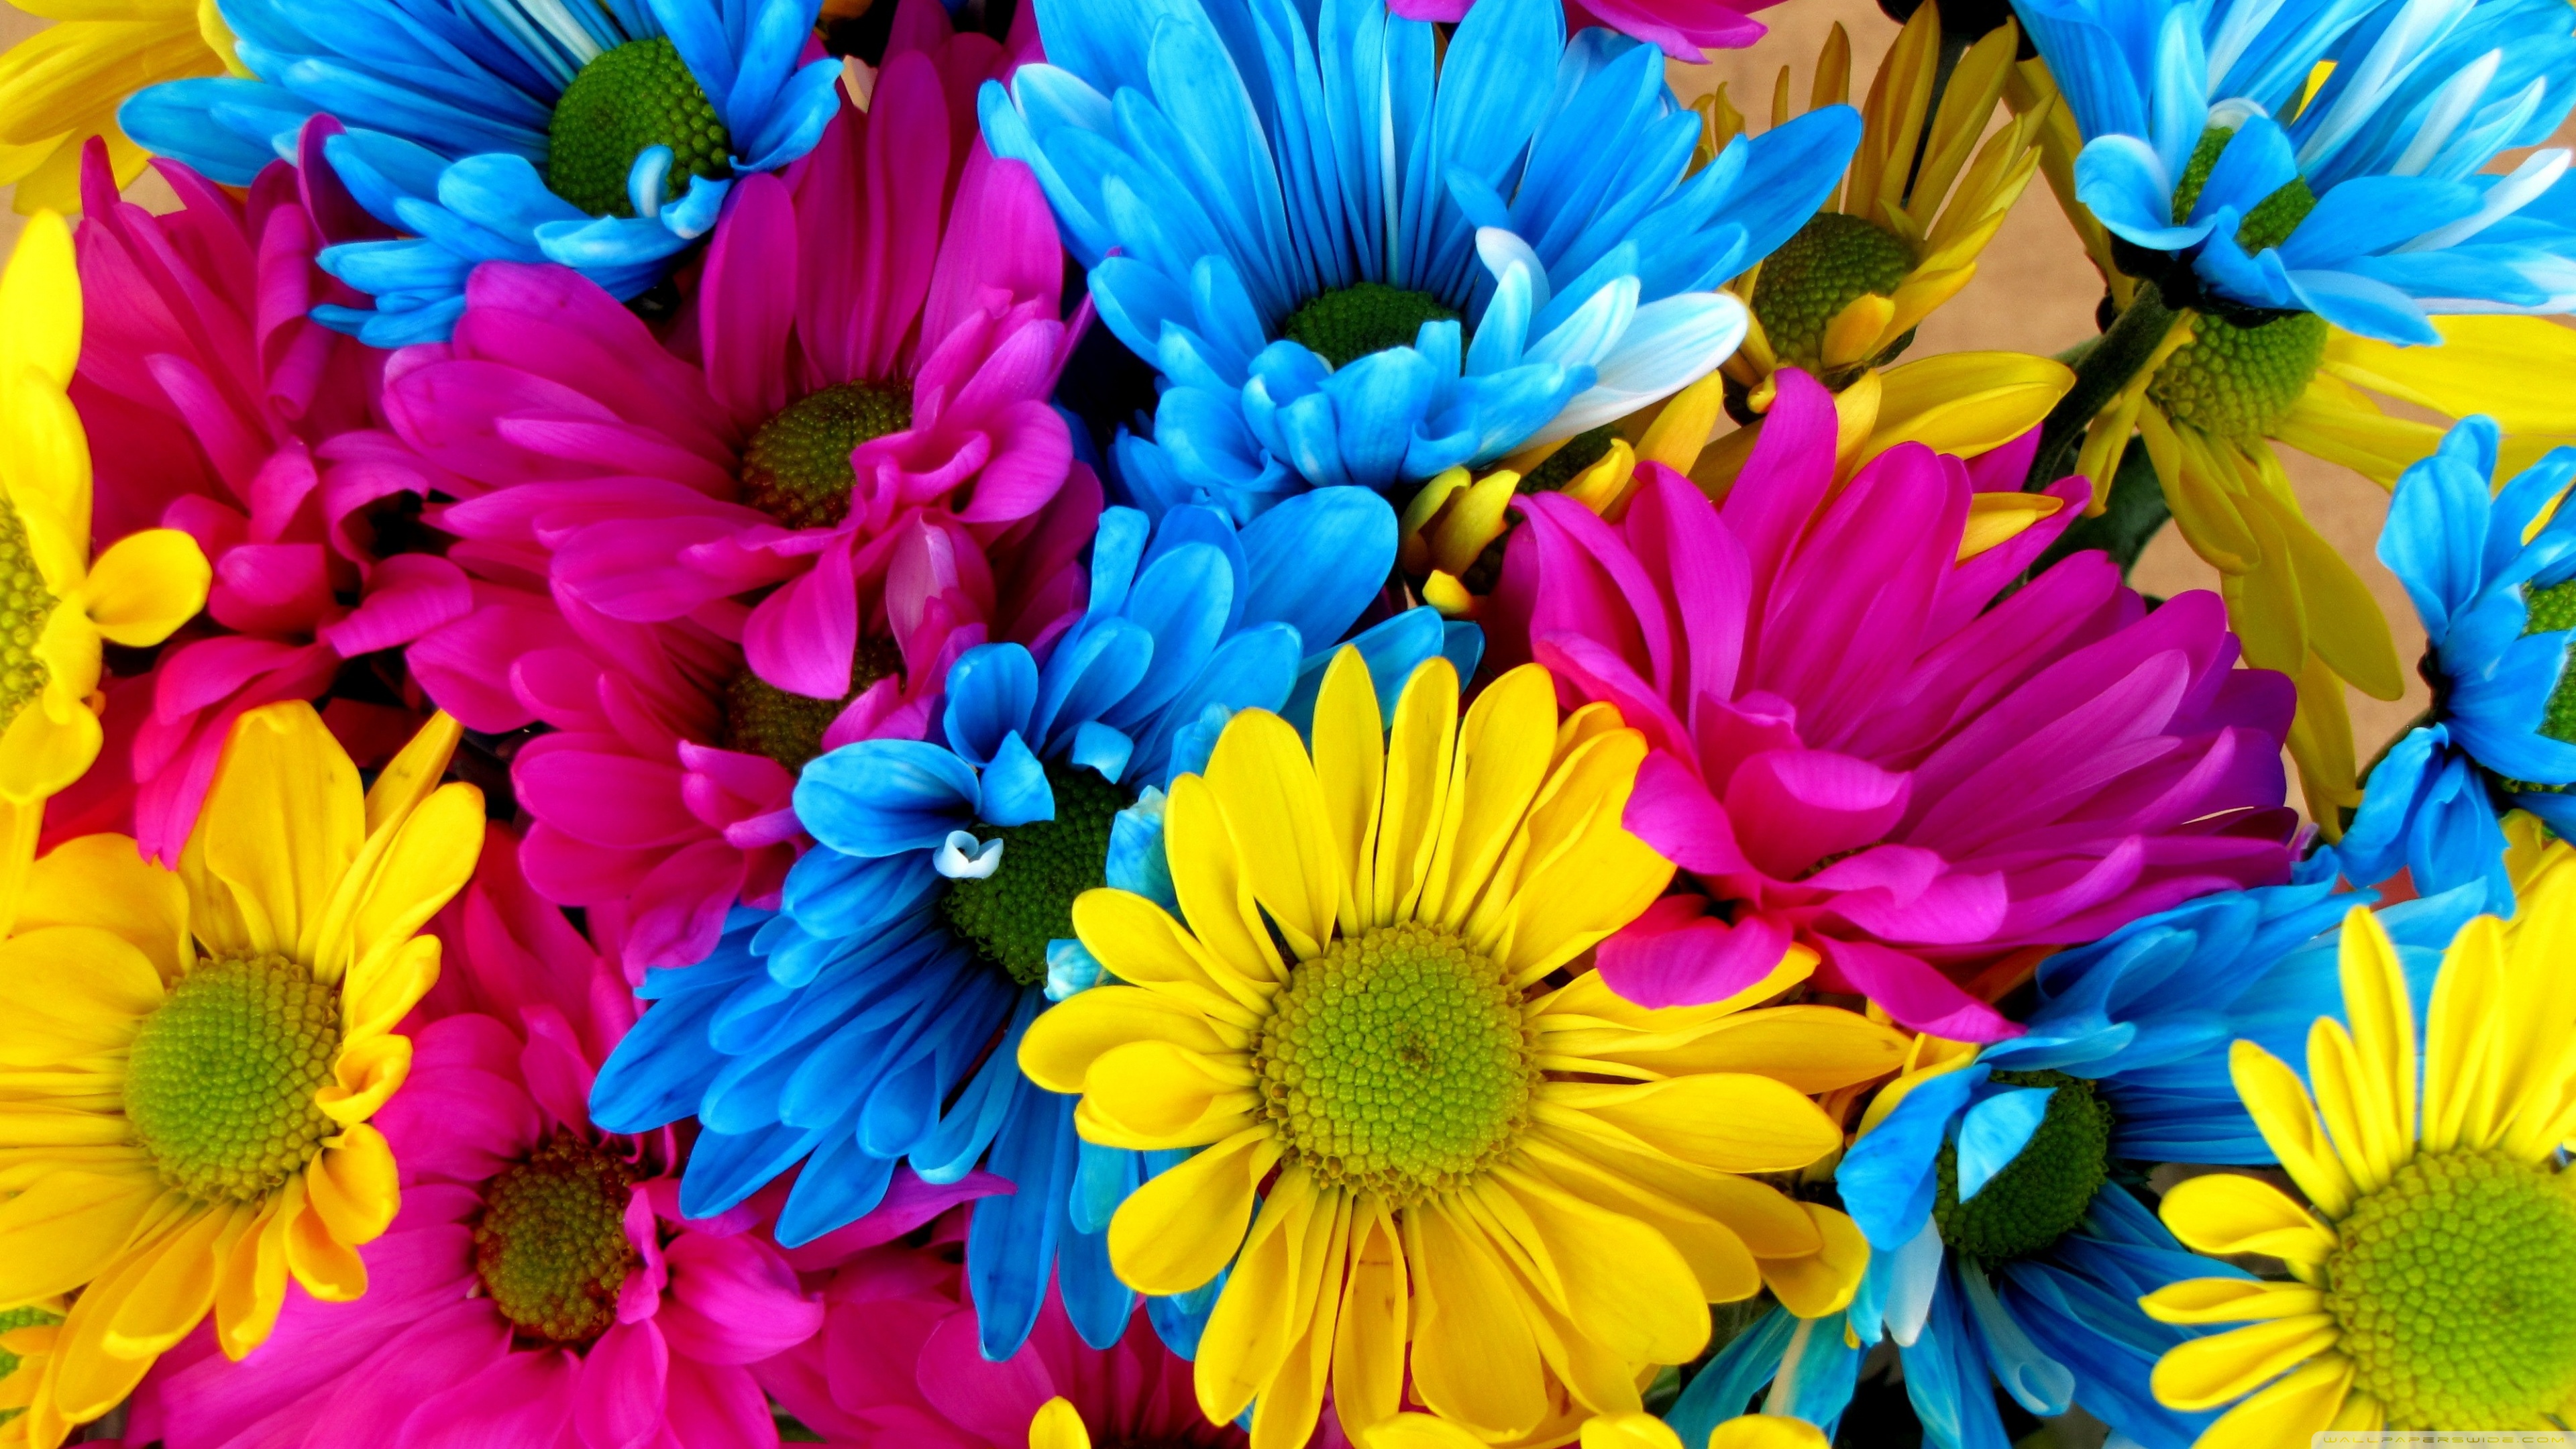 Colorful 4k Wallpaper - Colourful Daisies - 3840x2160 Wallpaper 